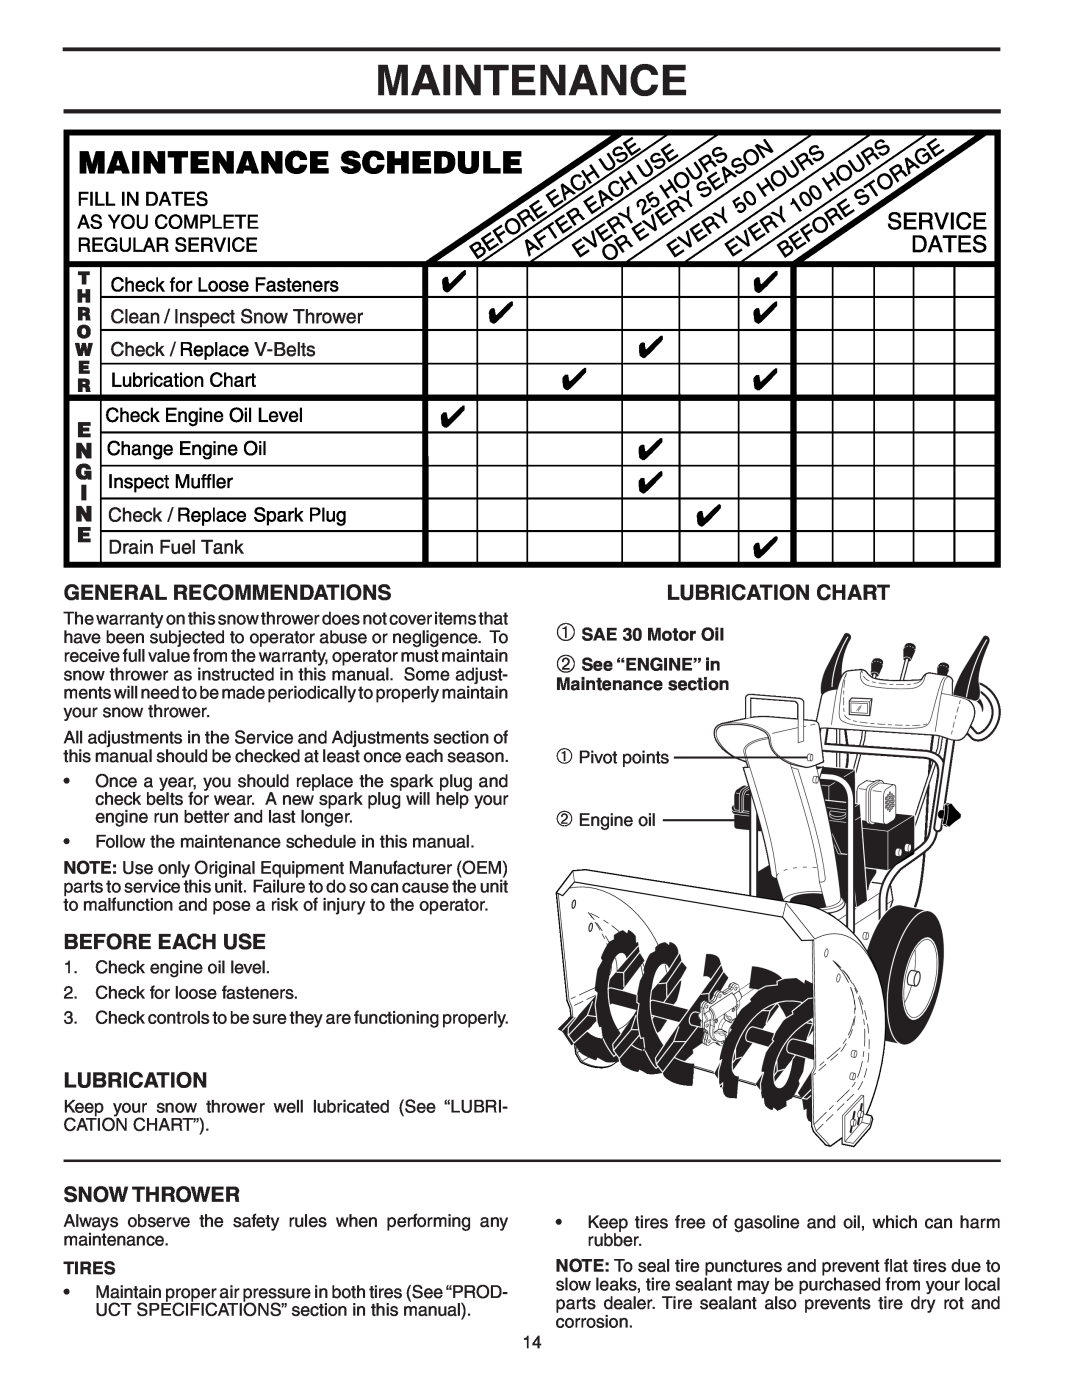 Poulan 185136 Maintenance, General Recommendations, Before Each Use, Snow Thrower, Lubrication Chart, Tires 